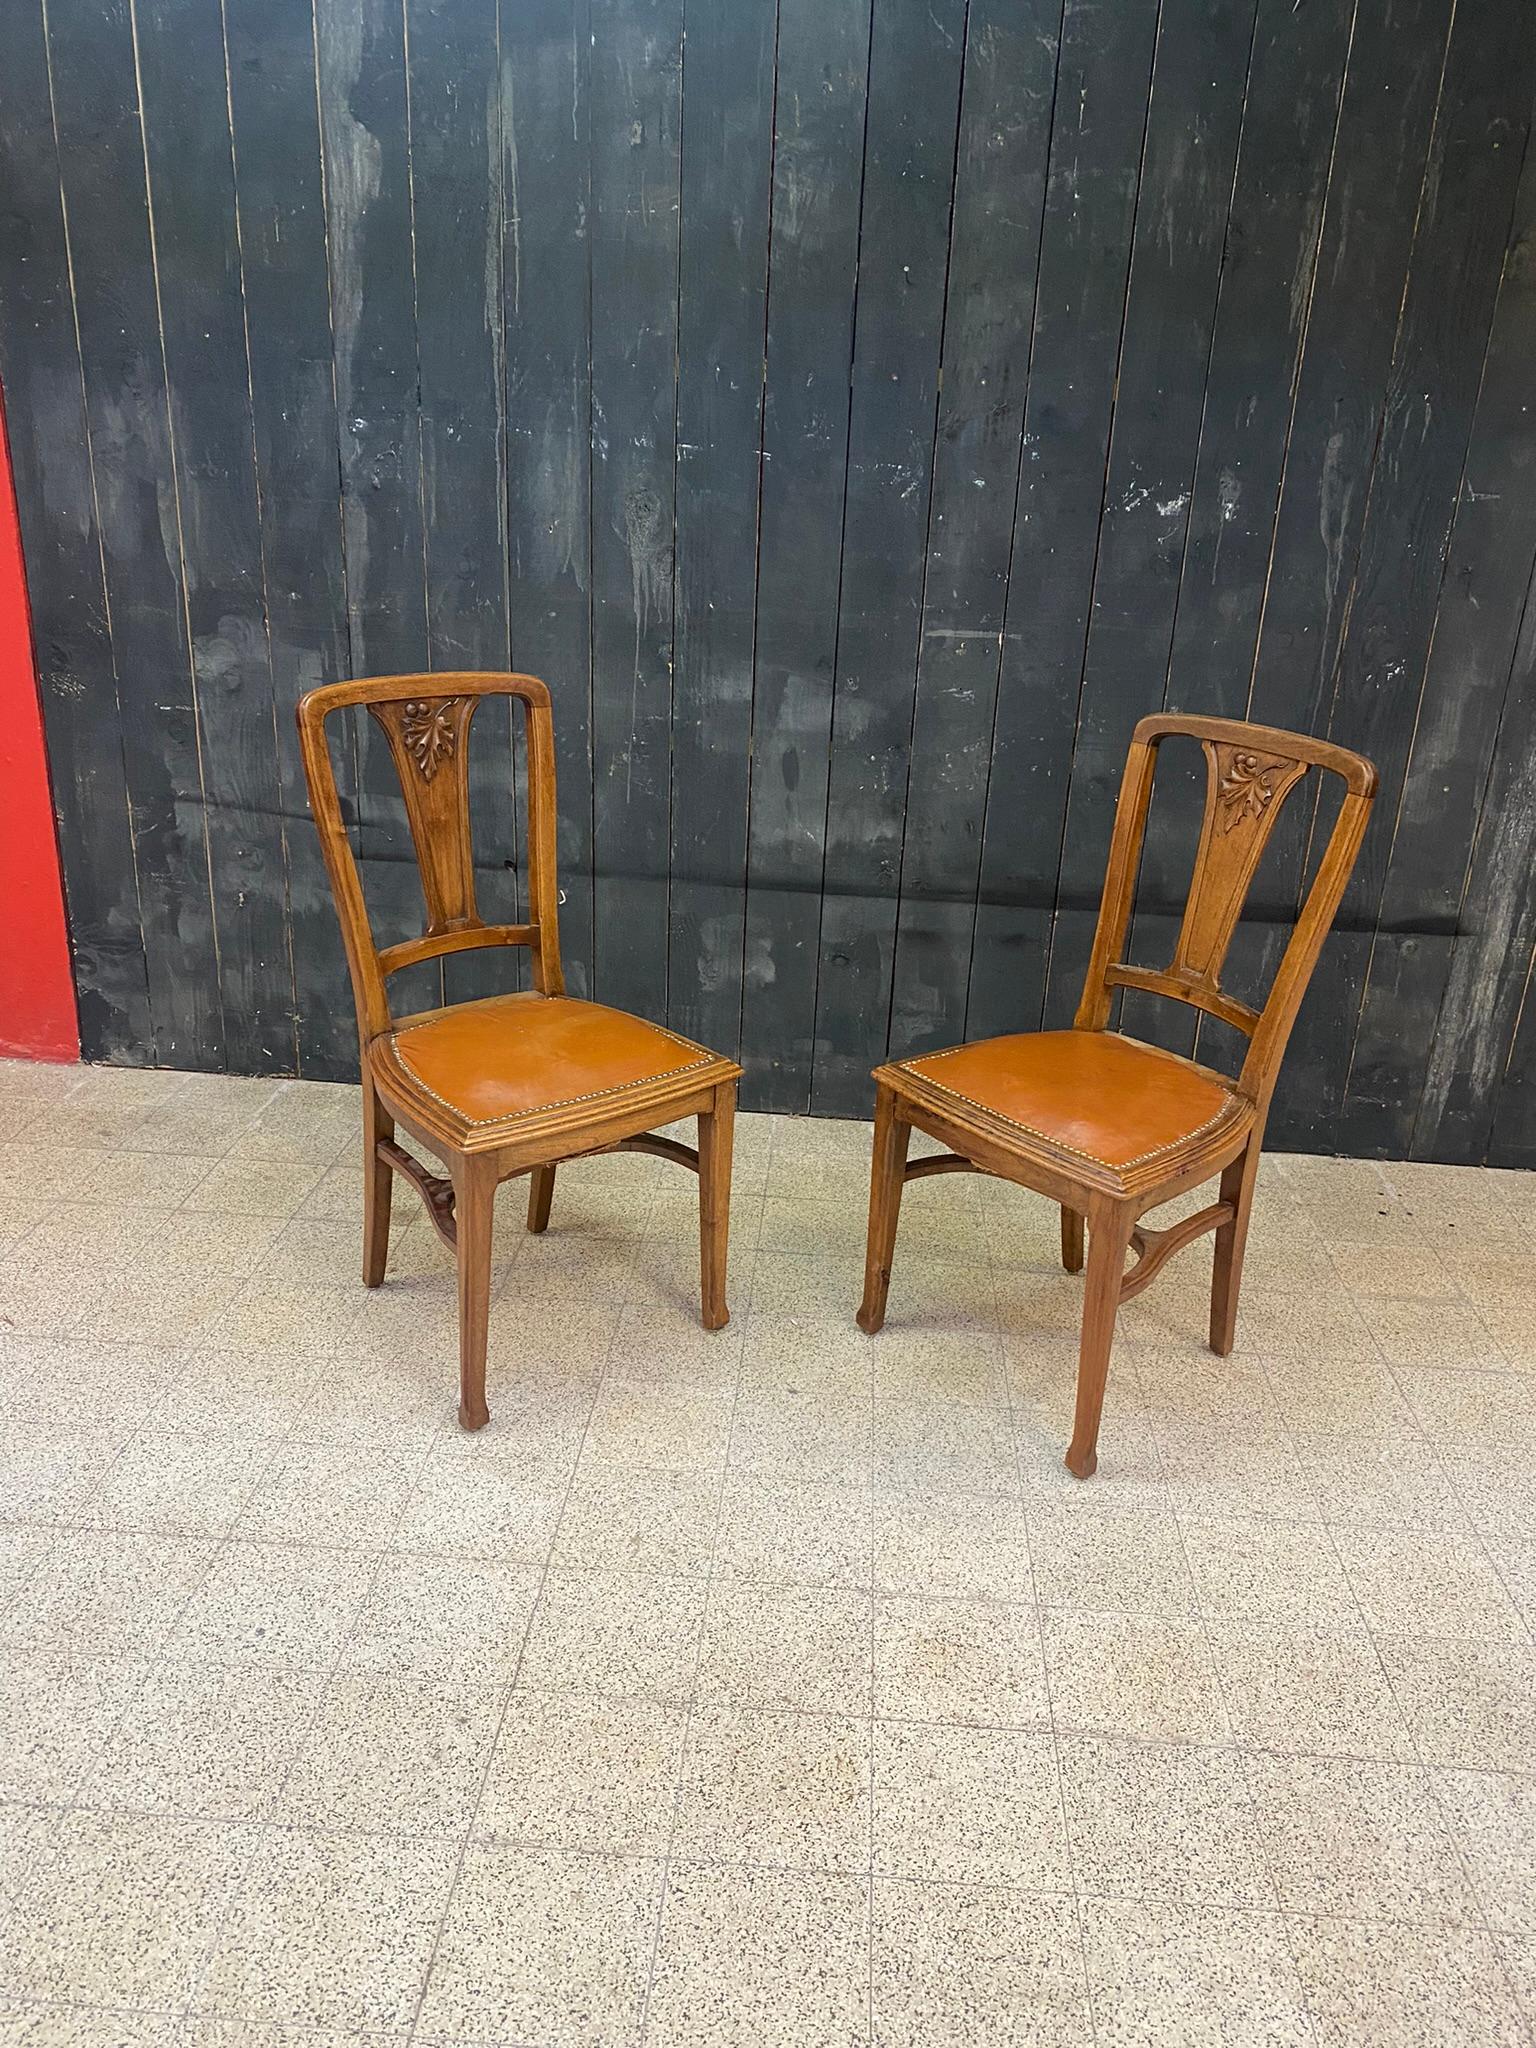 French Attributed to Gauthier-Poinsignon & Cie, 6 Art Nouveau Chairs Leather Seats For Sale